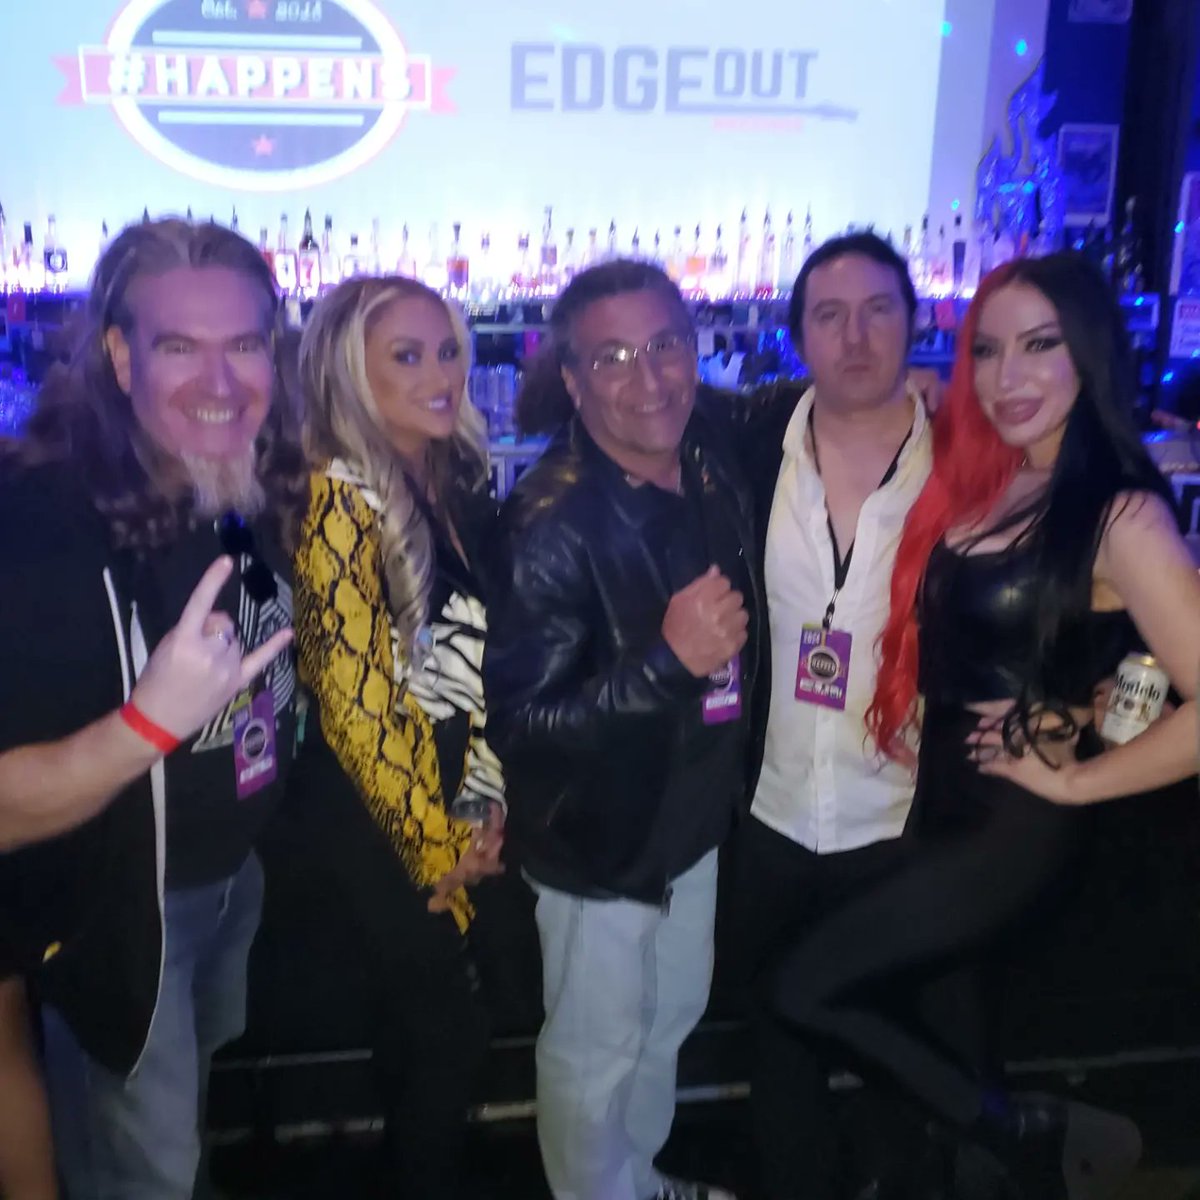 Great time at the Kick Off Party at this year's @hashtaghappens convention in Las Vegas. Great to have hangtime with @Witherfall @HeidiTheButcher @MLG_Rocks @Ash_Costello